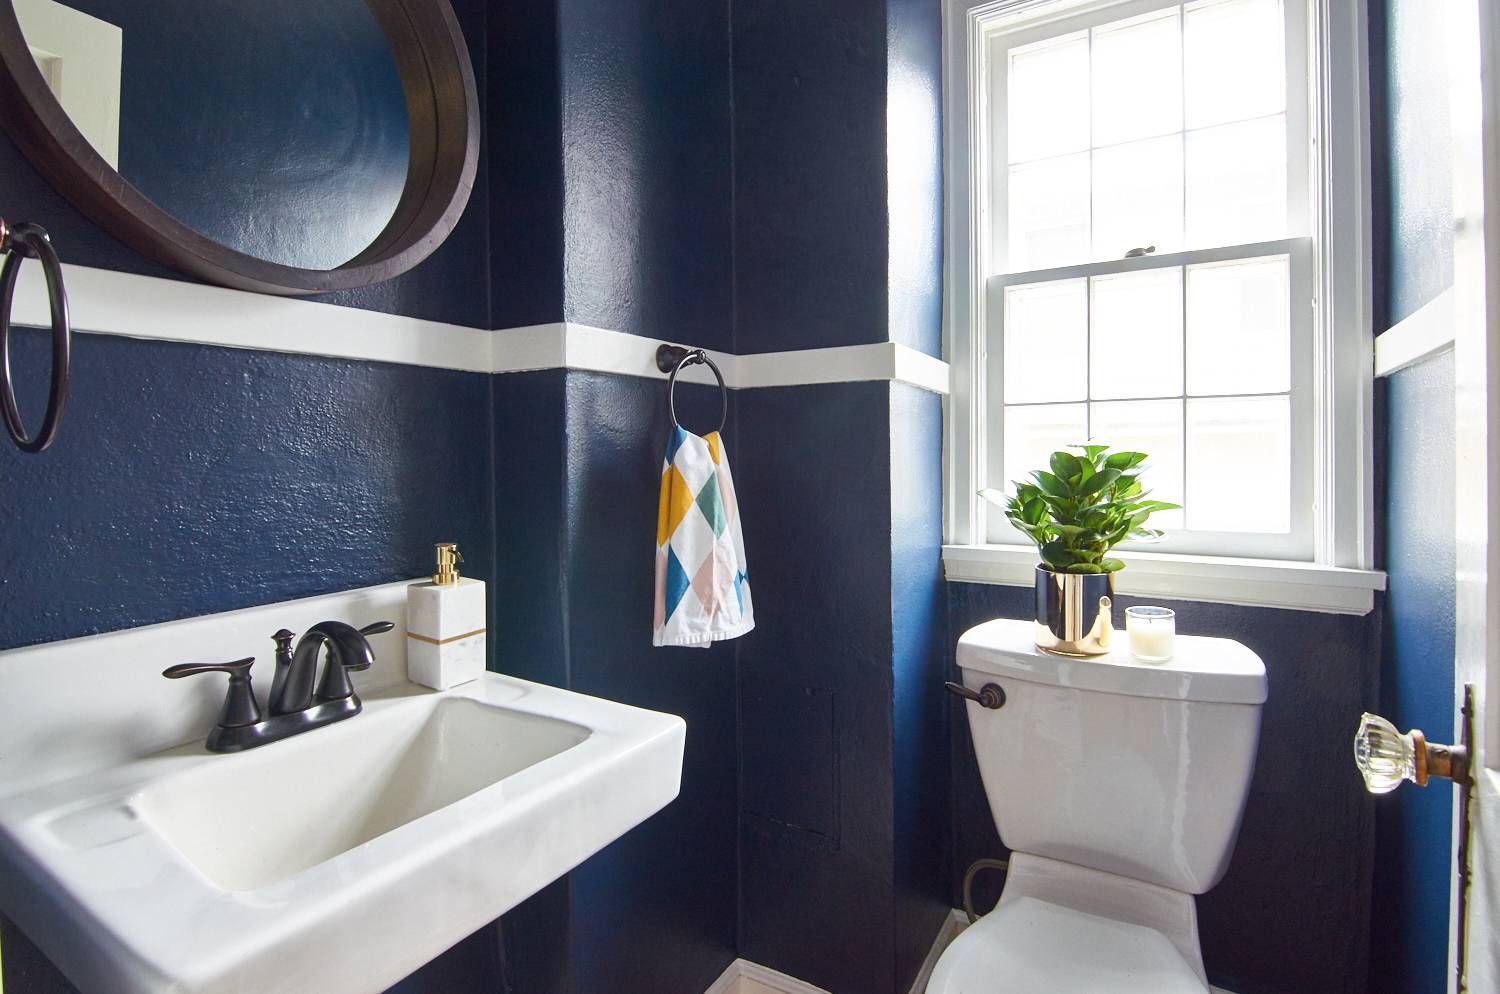 Using a dark color in a small space